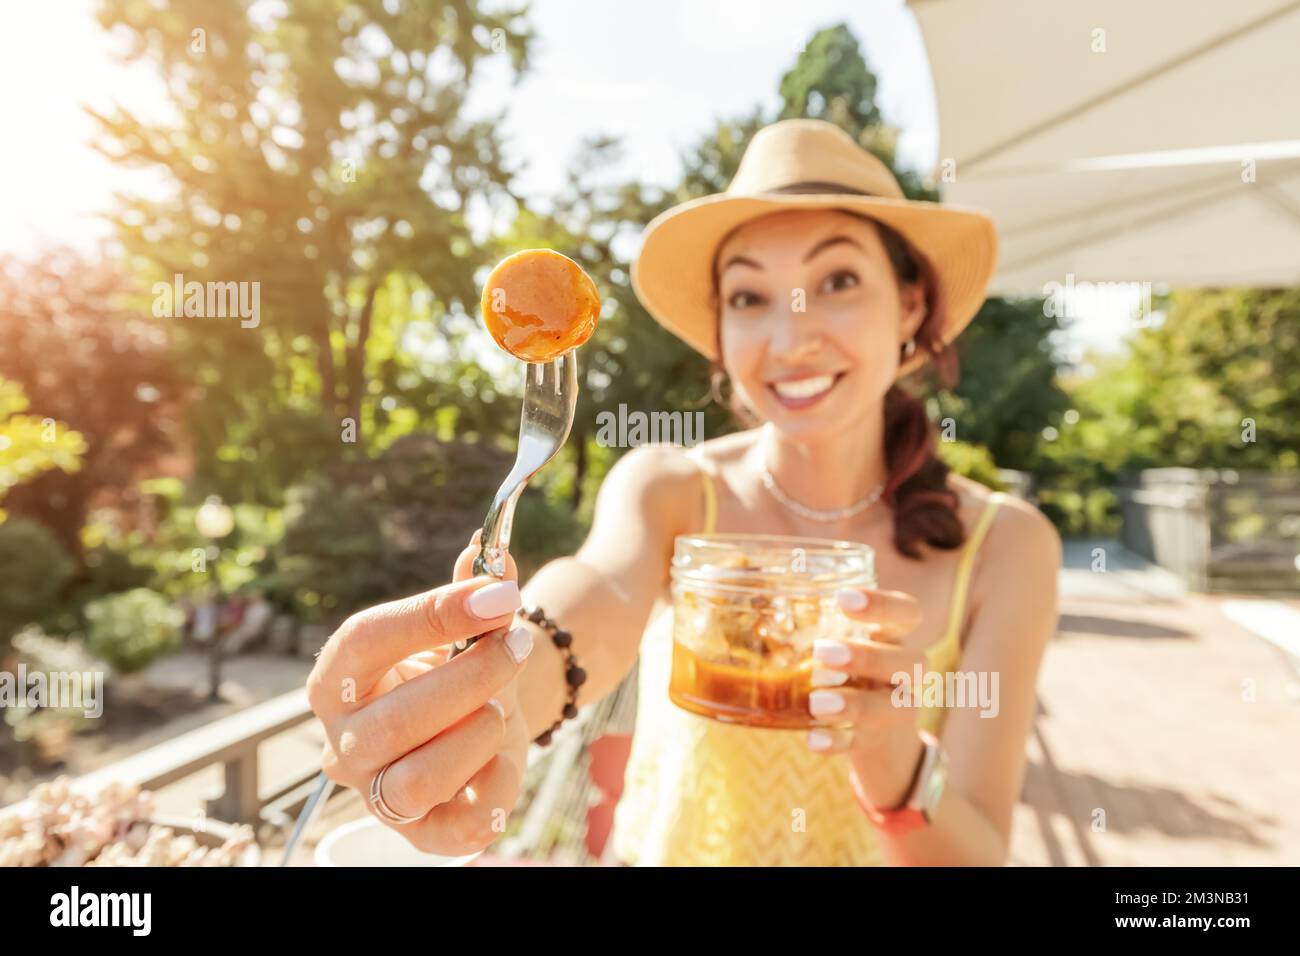 A happy girl eats an appetizing traditional German currywurst juicy sausage with seasonings at outdoor cafe Stock Photo